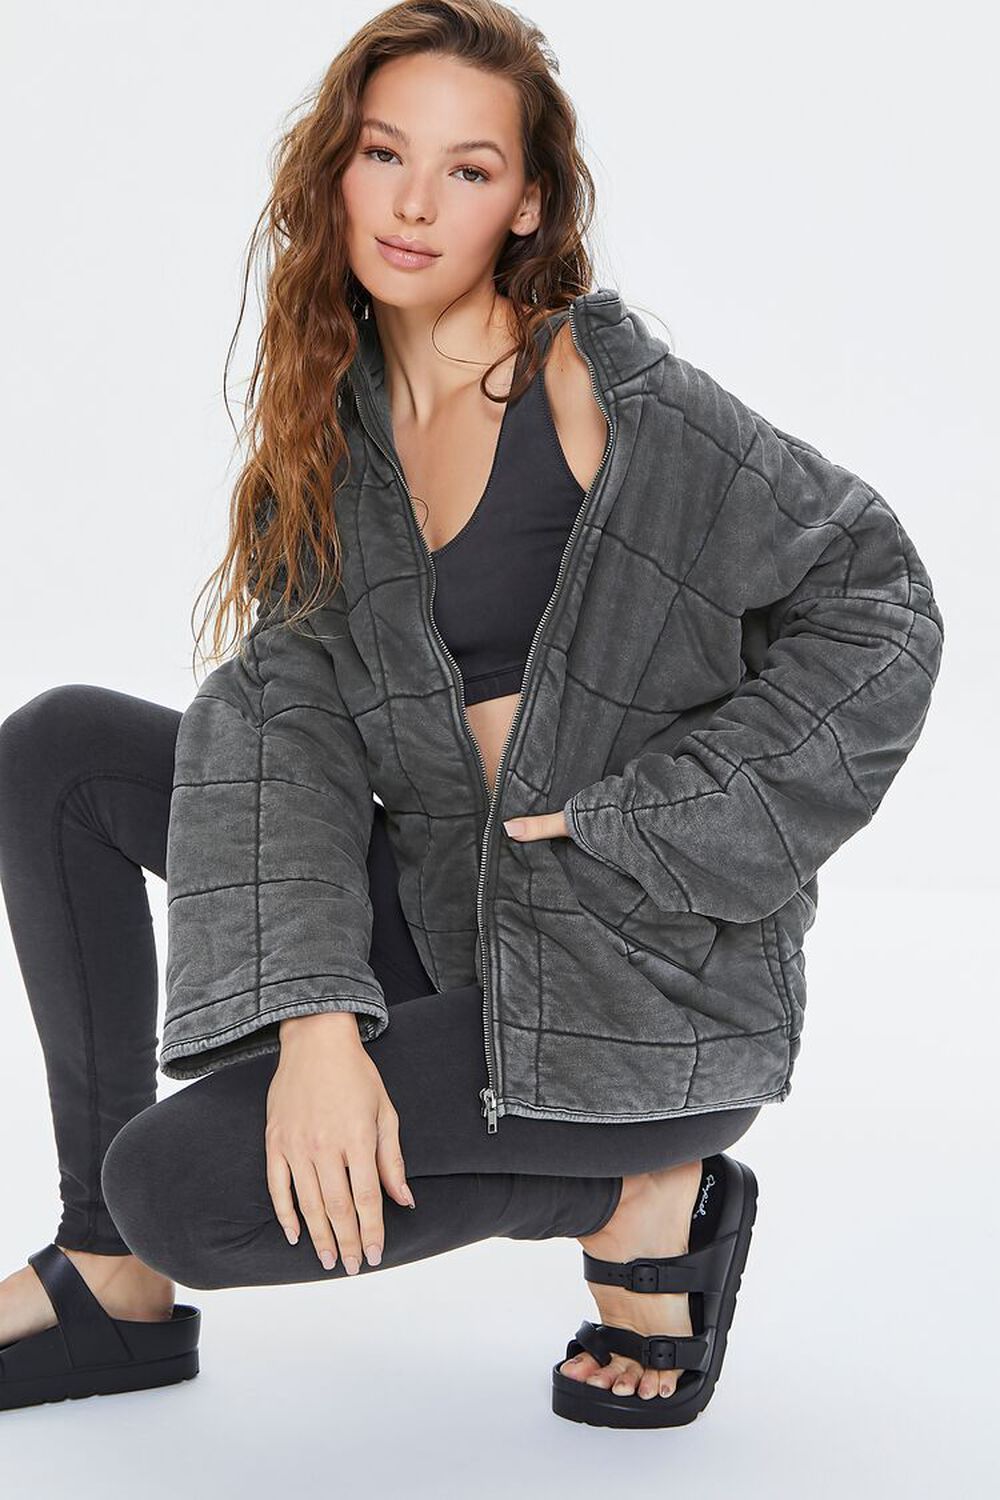 CHARCOAL Quilted Zip-Up Jacket, image 1